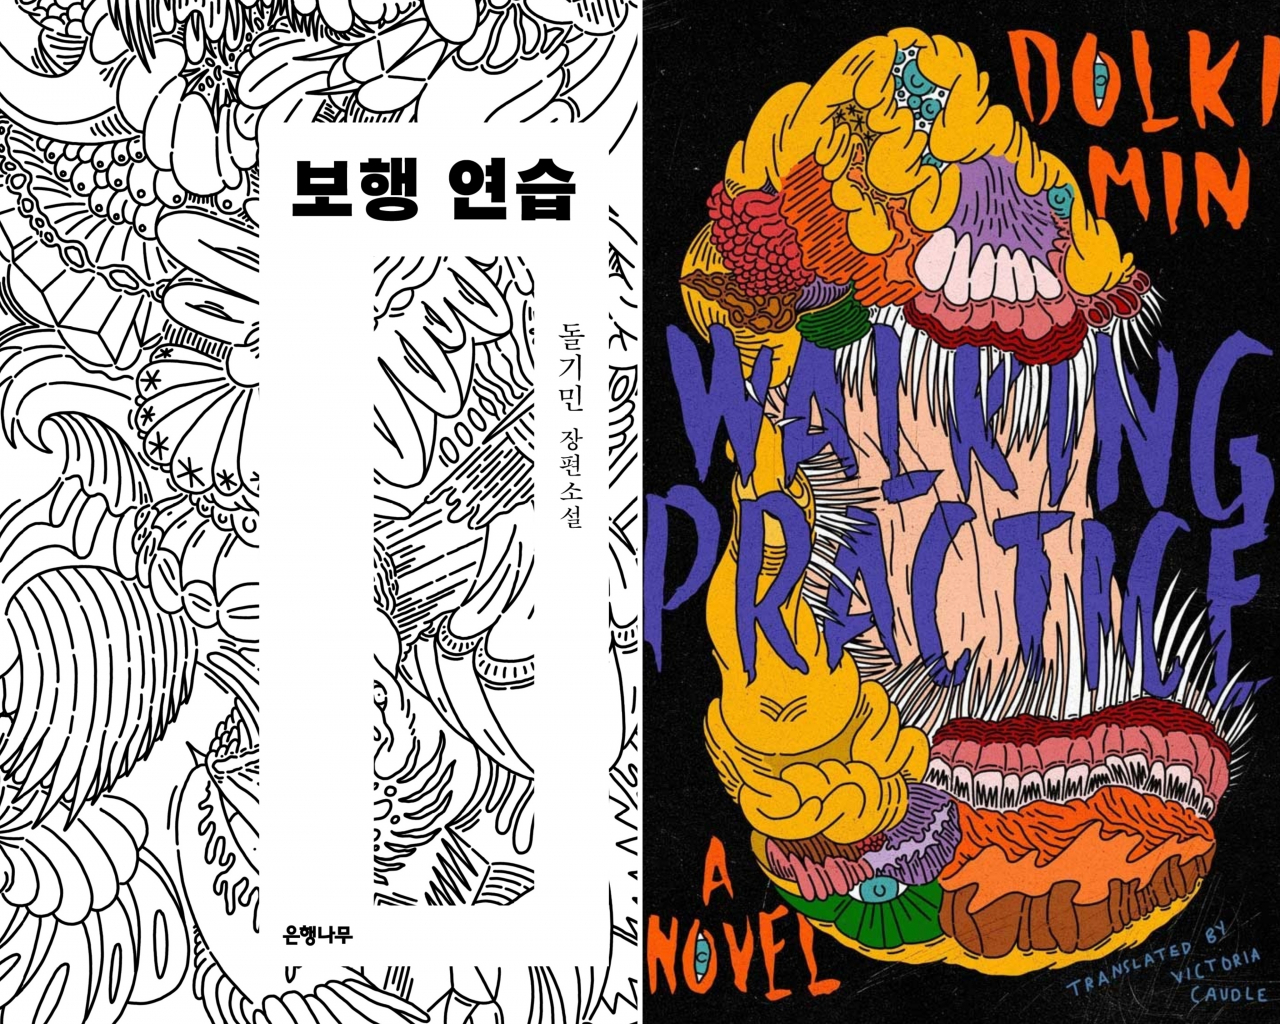 Korean edition (left) and English edition of 